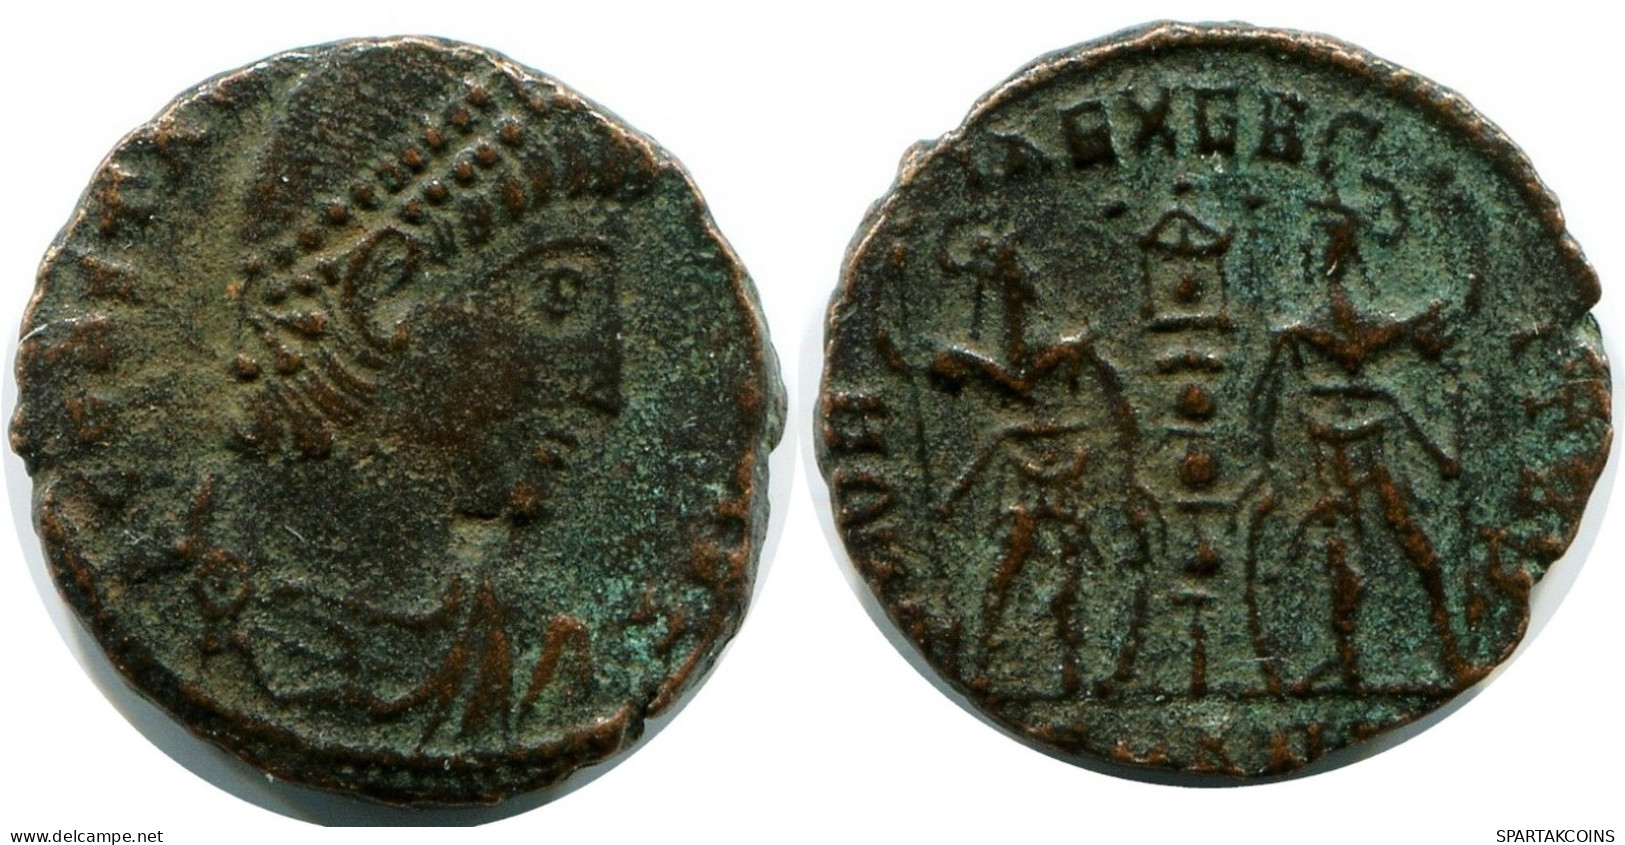 RÖMISCHE Münze MINTED IN ANTIOCH FROM THE ROYAL ONTARIO MUSEUM #ANC11303.14.D.A - El Imperio Christiano (307 / 363)